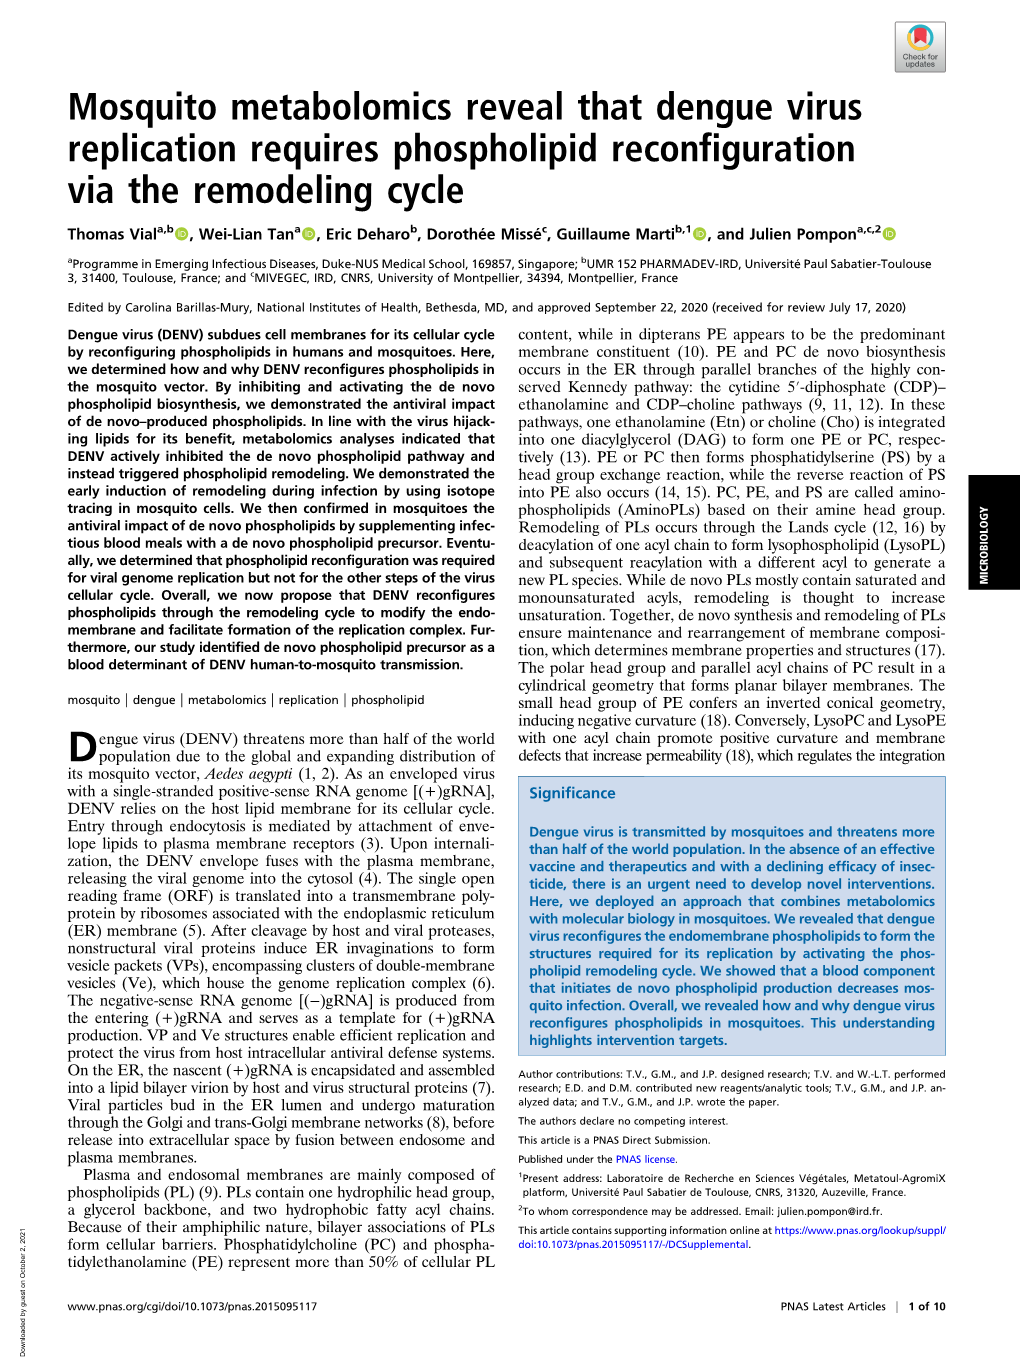 Mosquito Metabolomics Reveal That Dengue Virus Replication Requires Phospholipid Reconfiguration Via the Remodeling Cycle